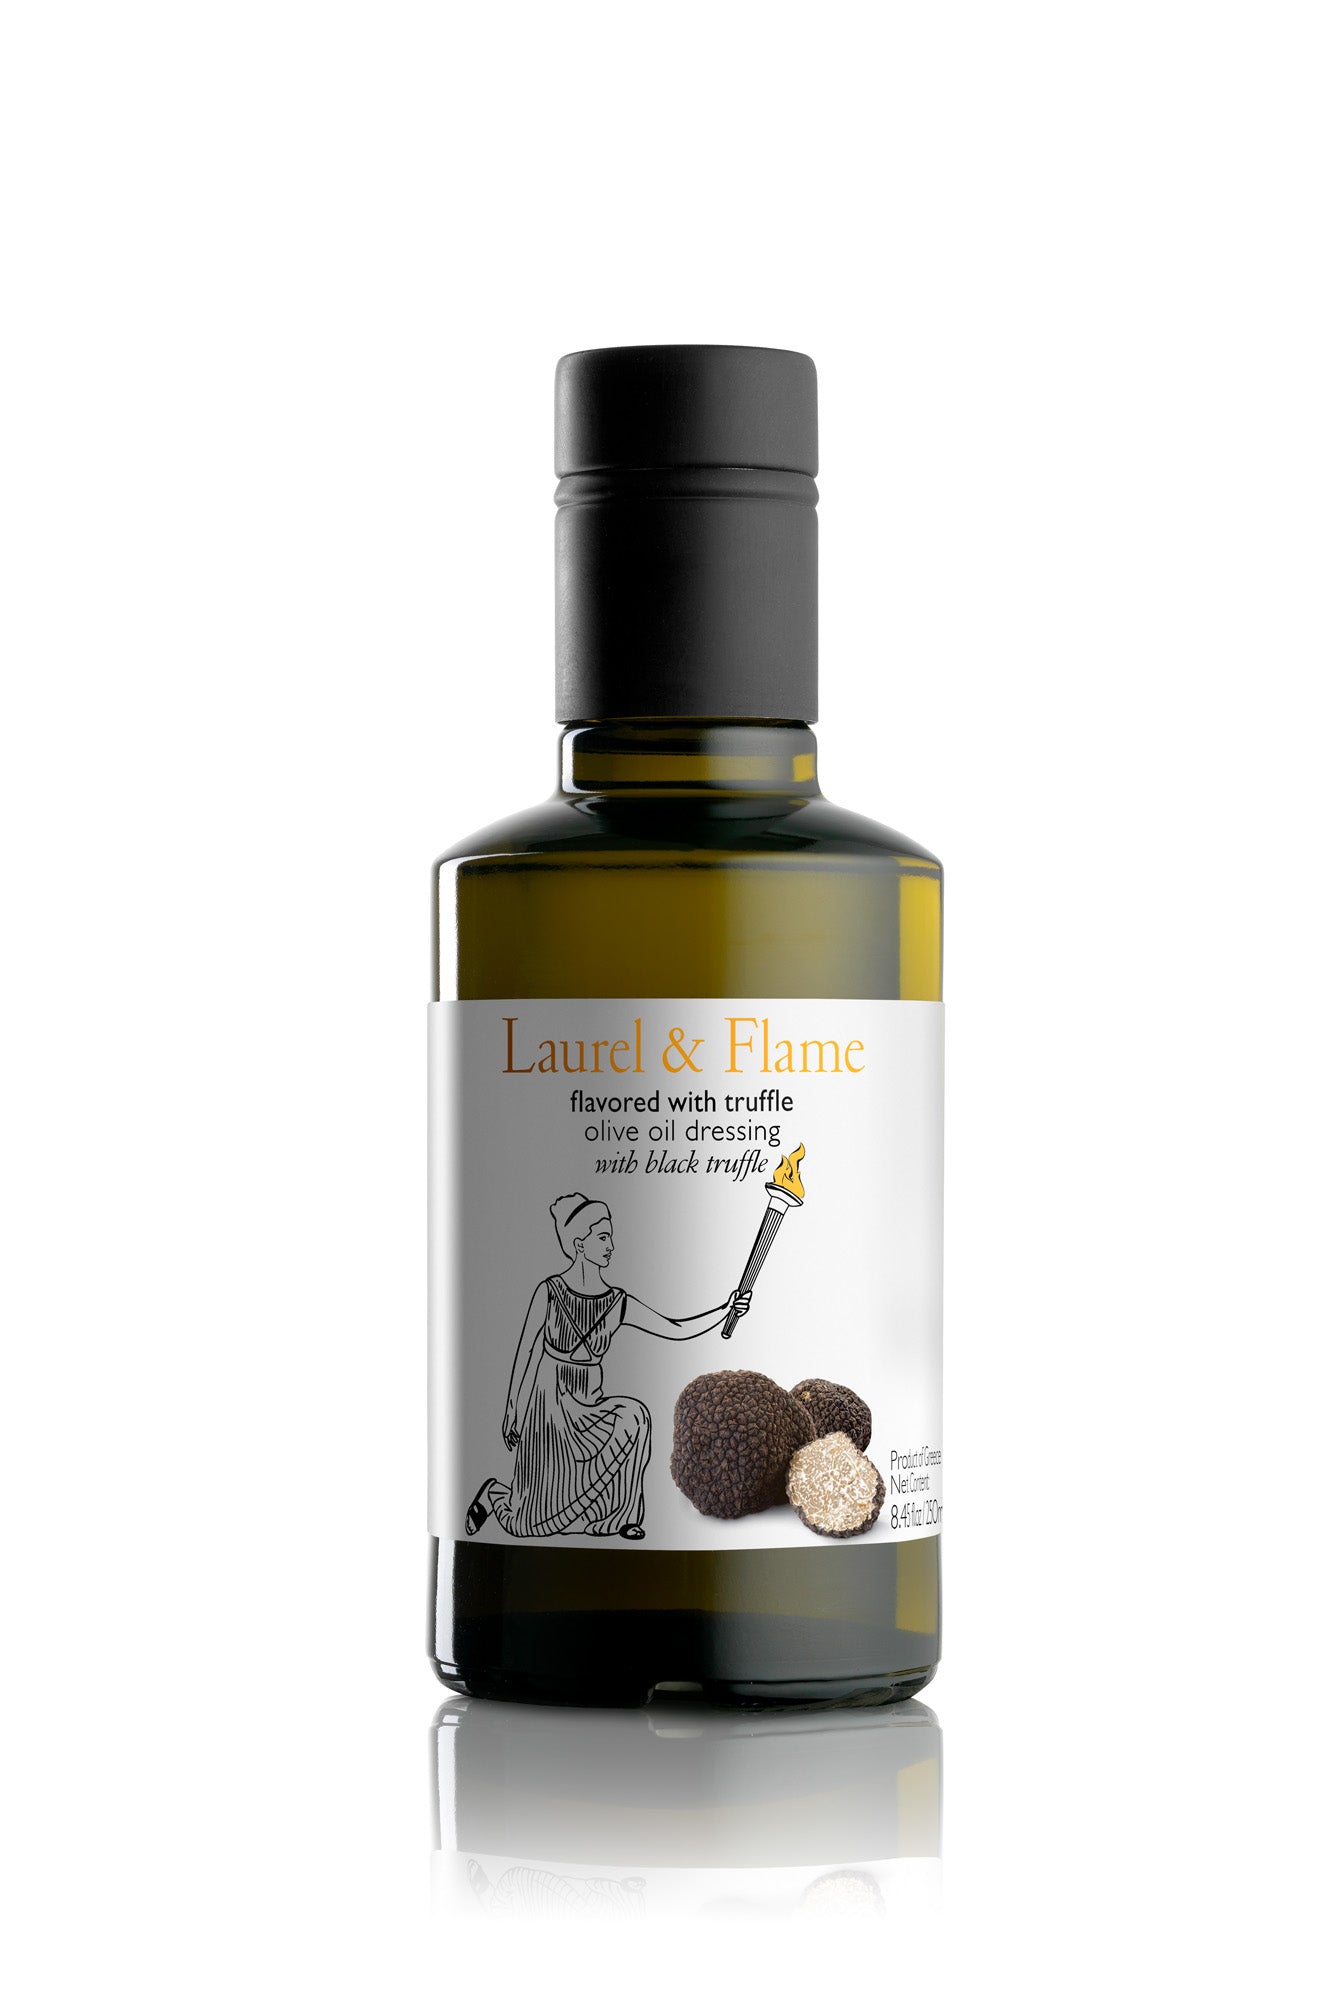 Laurel & Flame Flavored Truffle Extra-Virgin Olive Oil